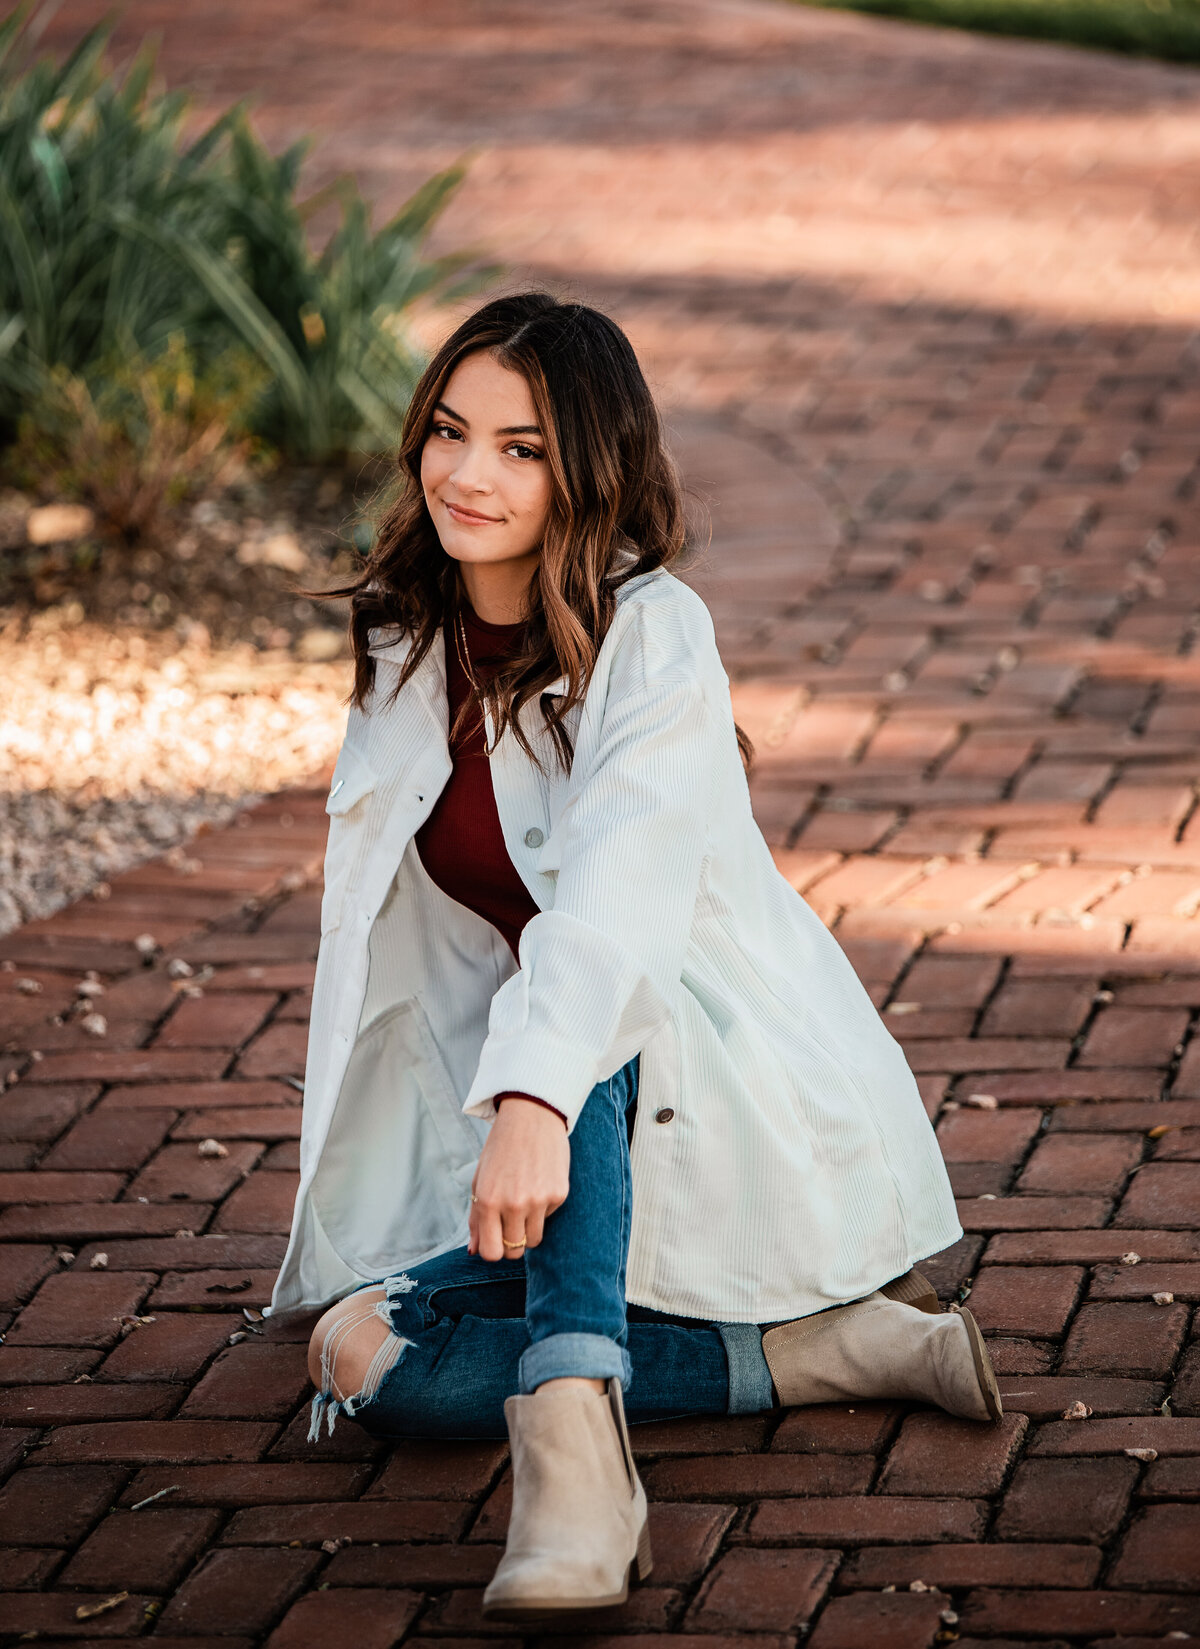 A local senior sits on a red brick walkway with a white jacket on.